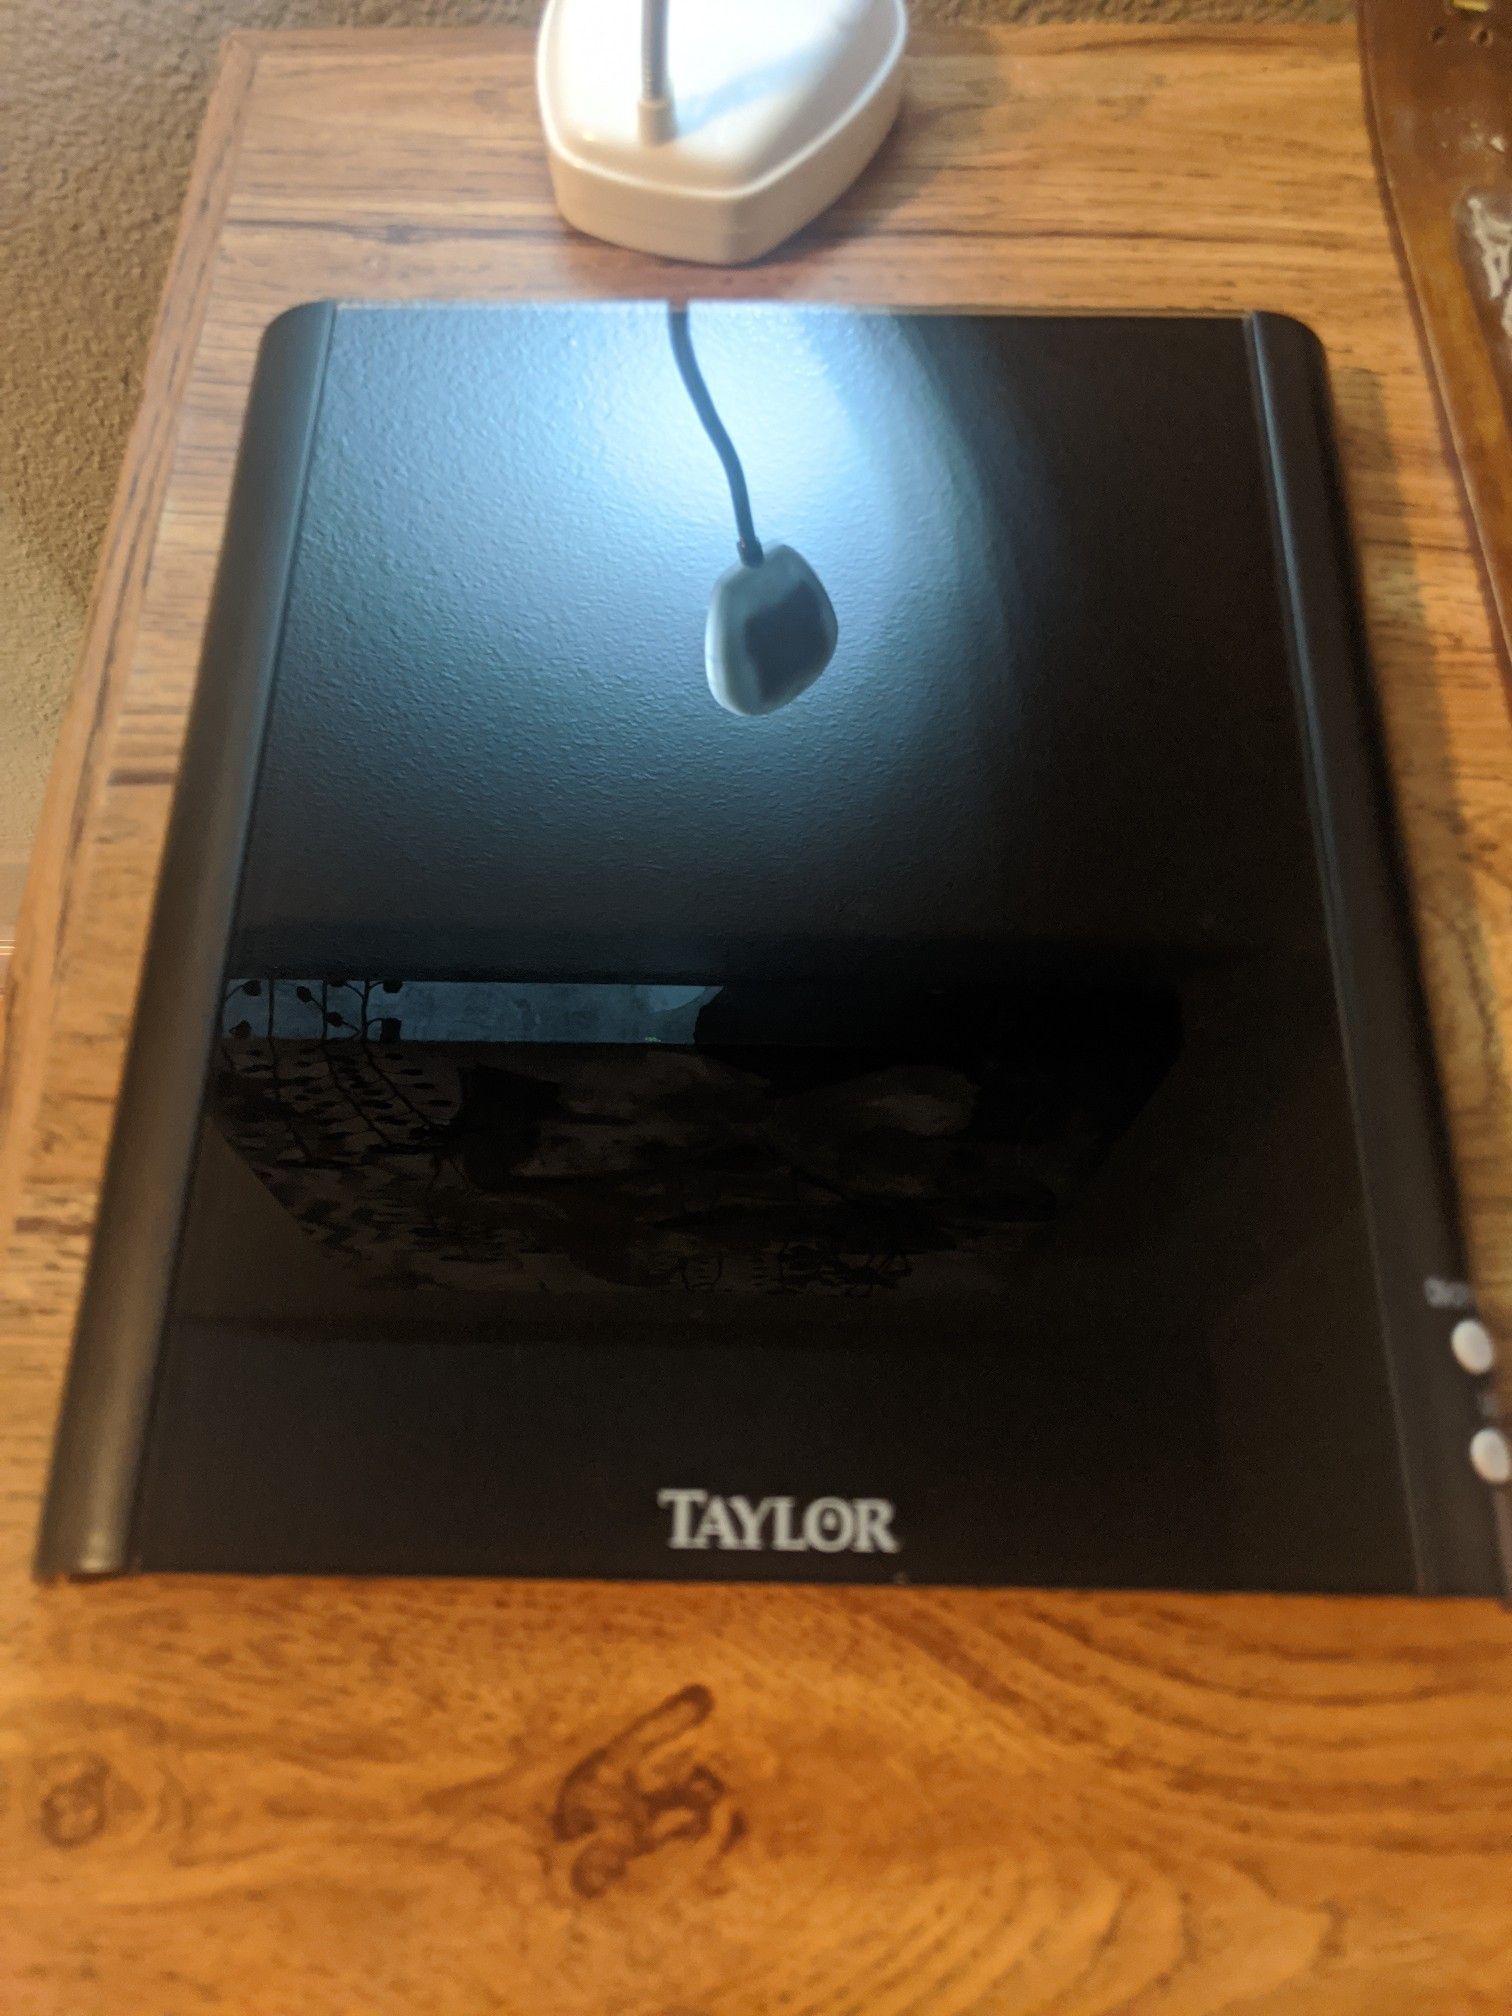 Taylor LED digital scale 11 pound capacity. LBS:OZ TO GRAMS